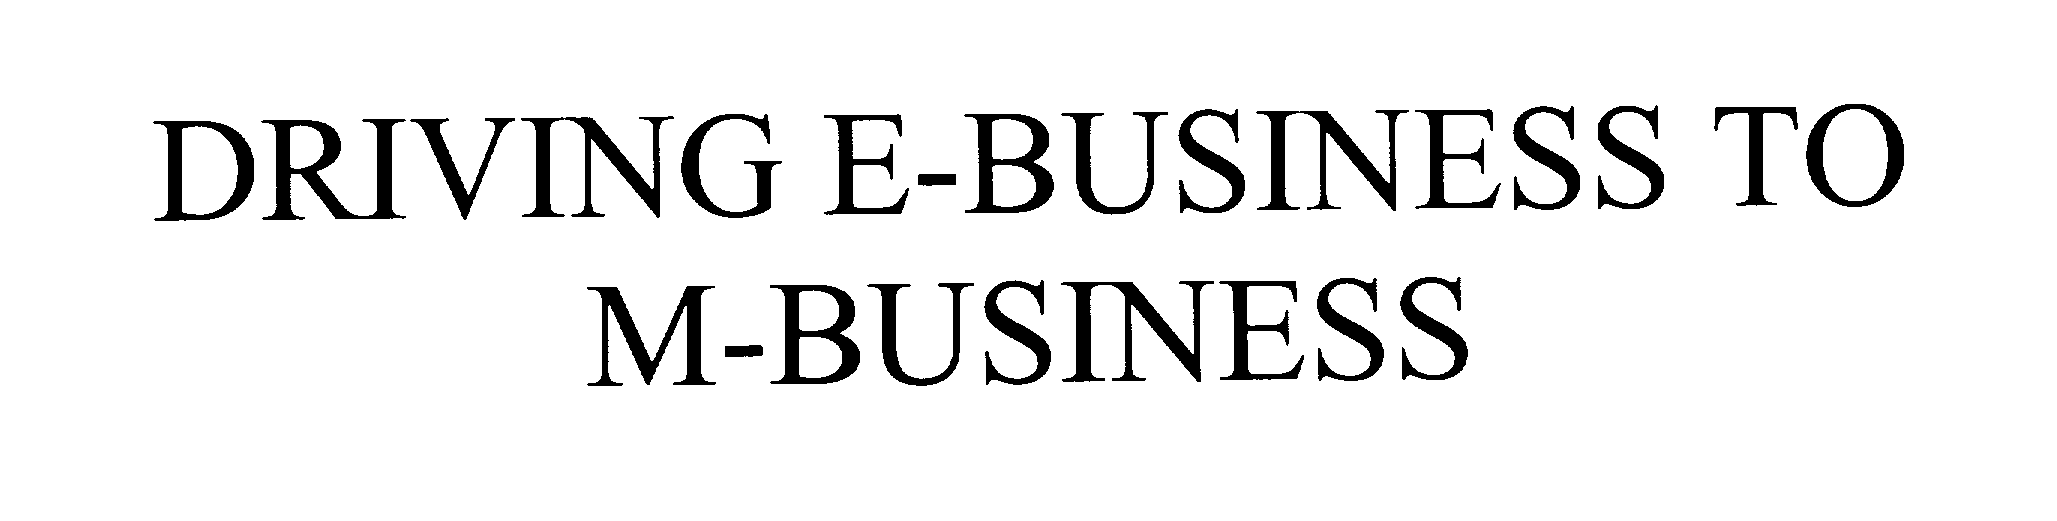  DRIVING E-BUSINESS TO M-BUSINESS